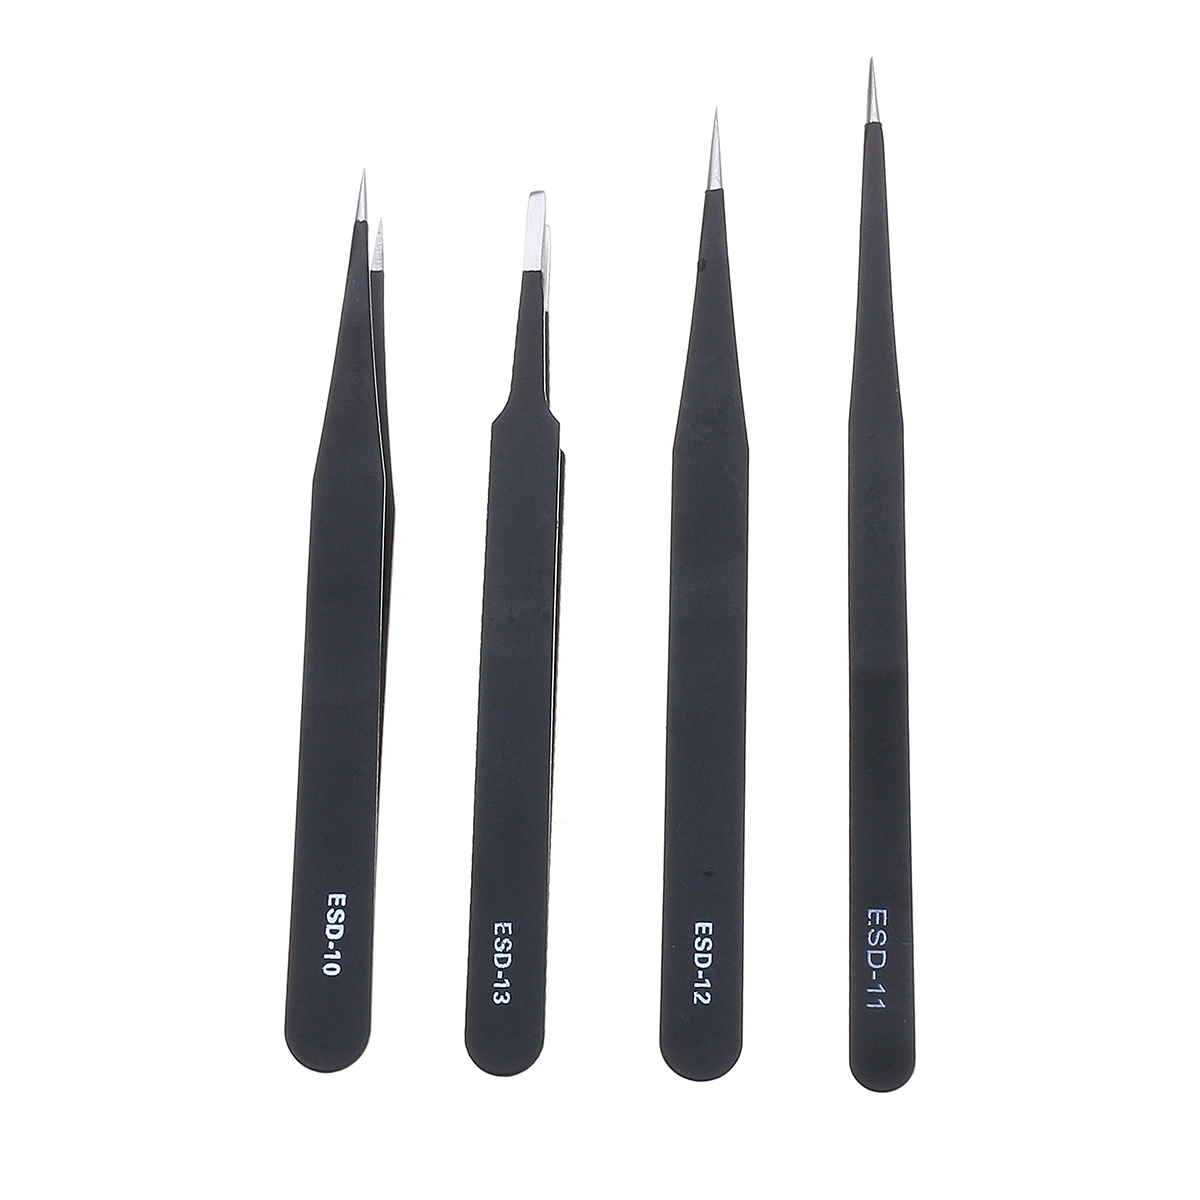 9 Pcs ESD Tweezer Anti-static Stainless Steel Precision Tweezers for Electronics Nail Beauty 13